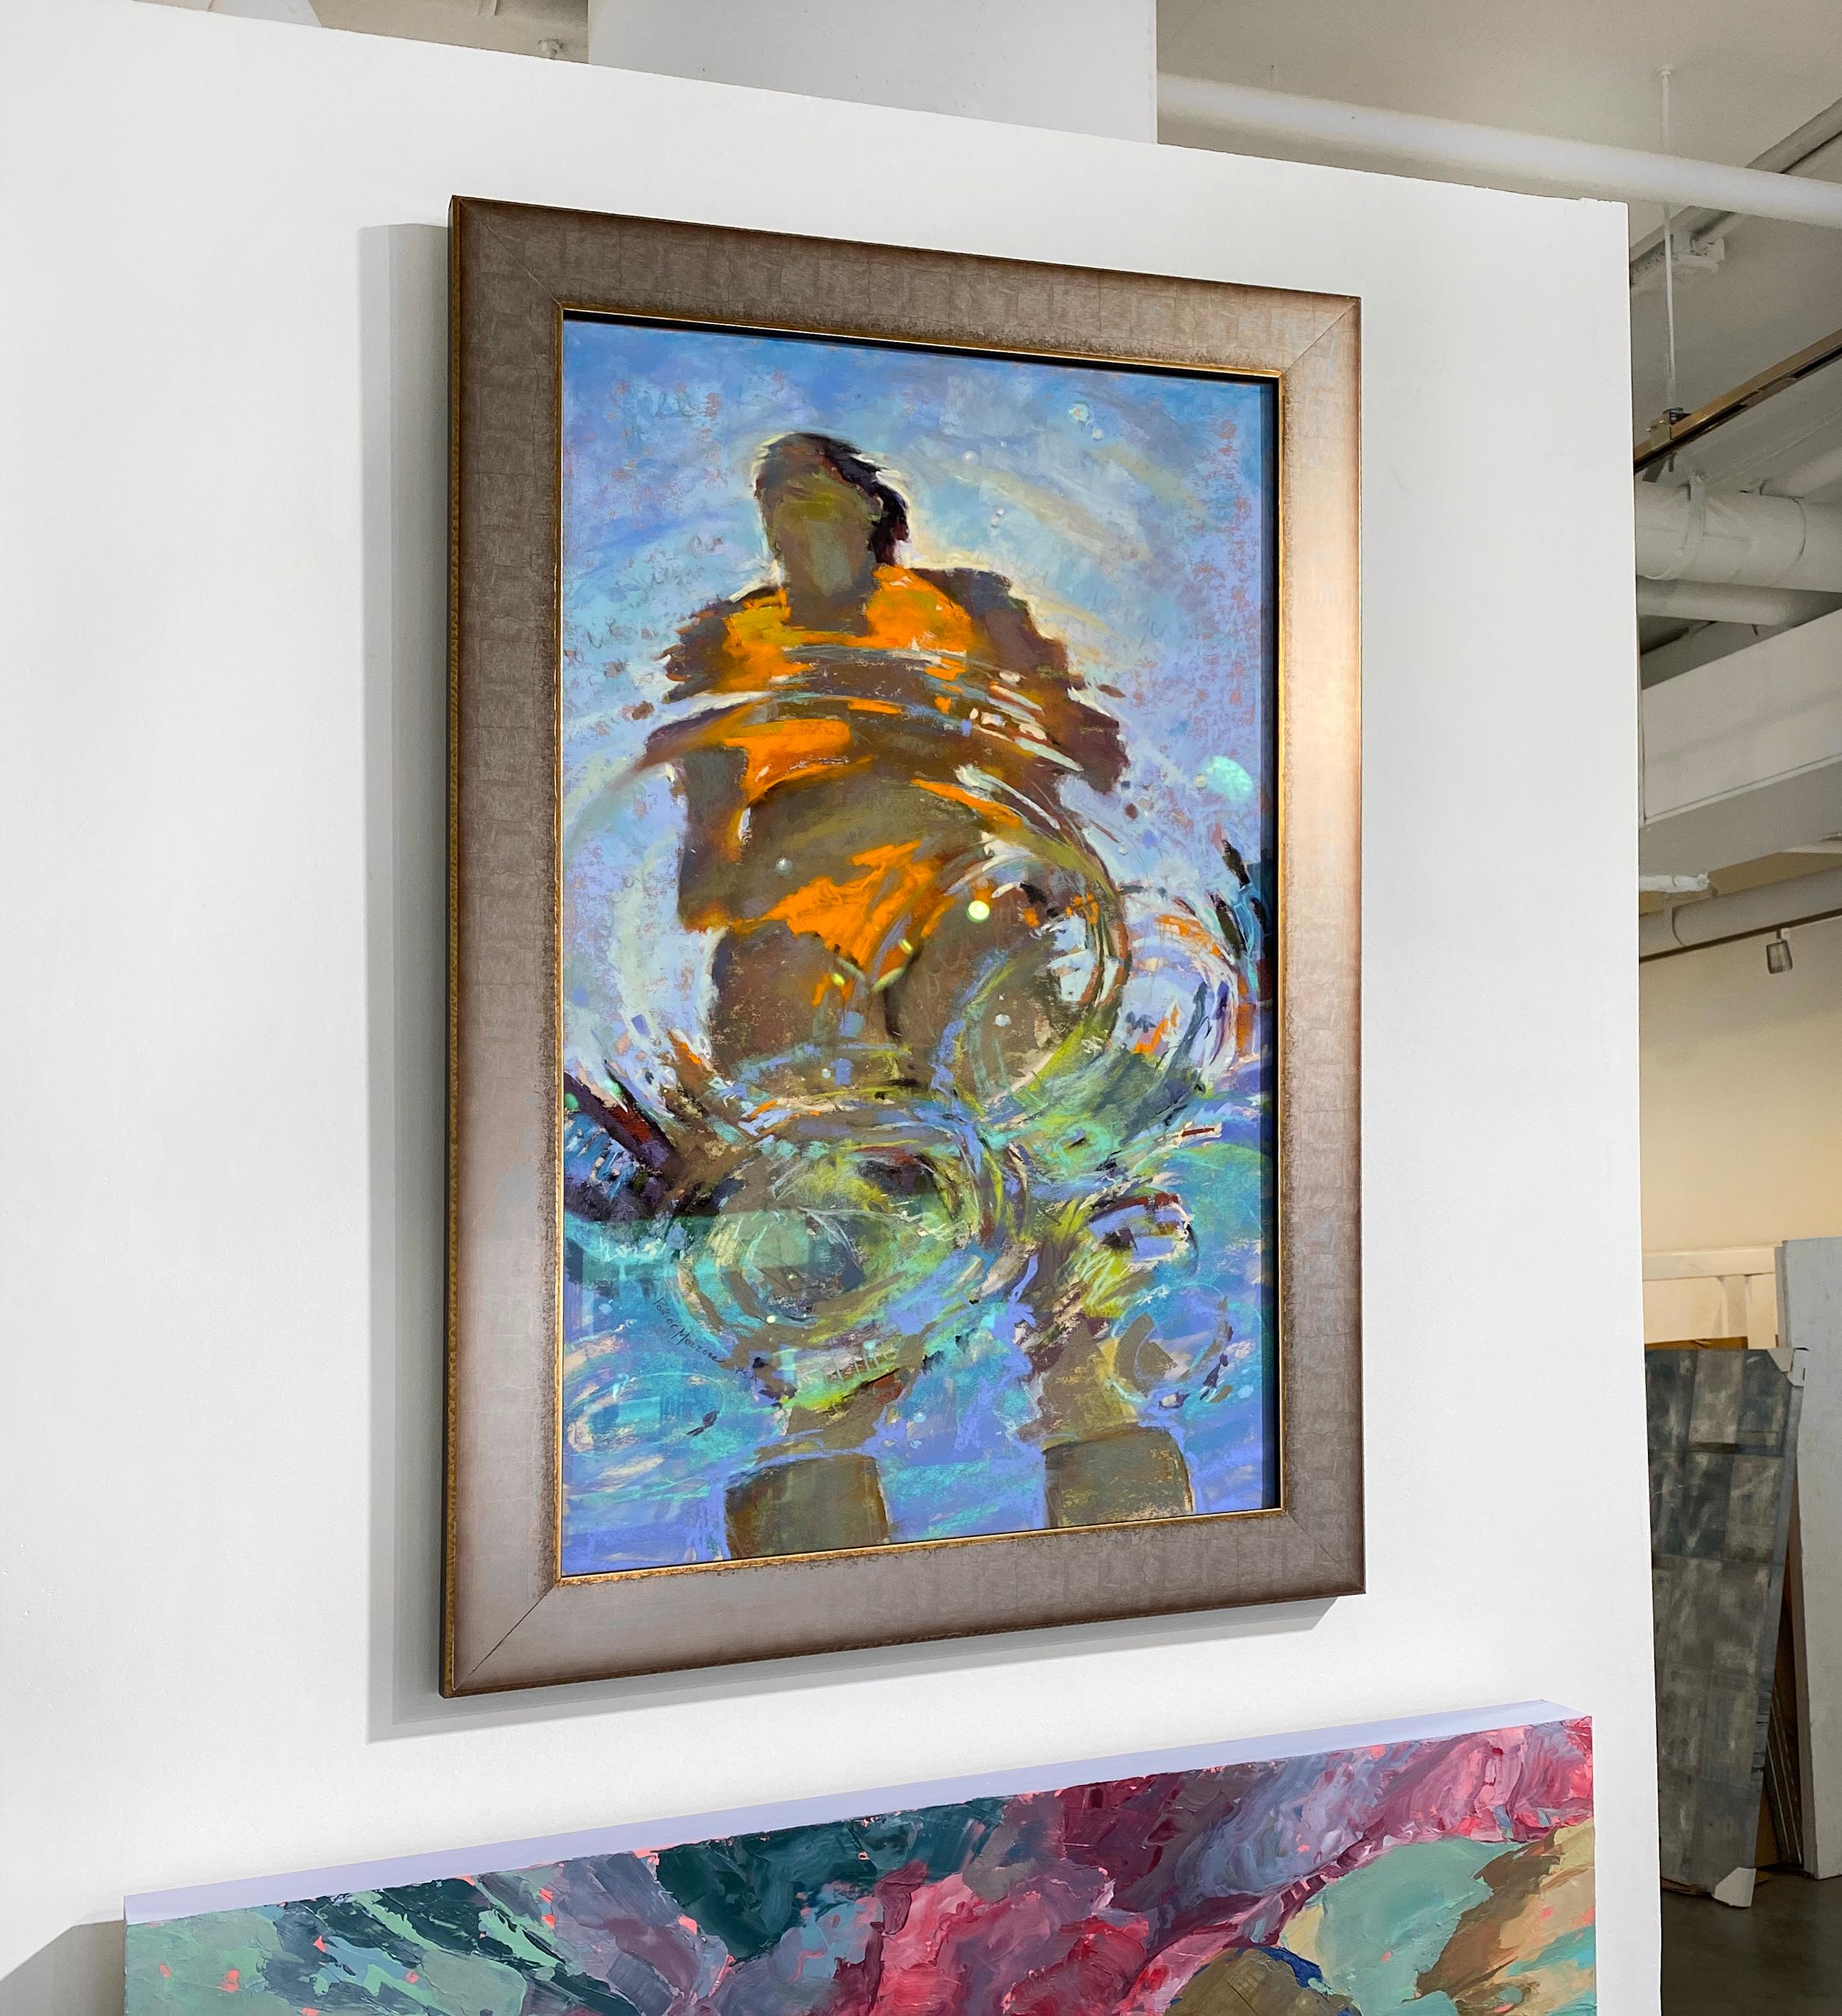 This abstract under water piece by Michele Poirier-Mozzone is captured from an angle beneath the surface of water, looking up at a woman wearing a bright orange bathing suit. The water's surface ripples, fracturing the figure with additional colors